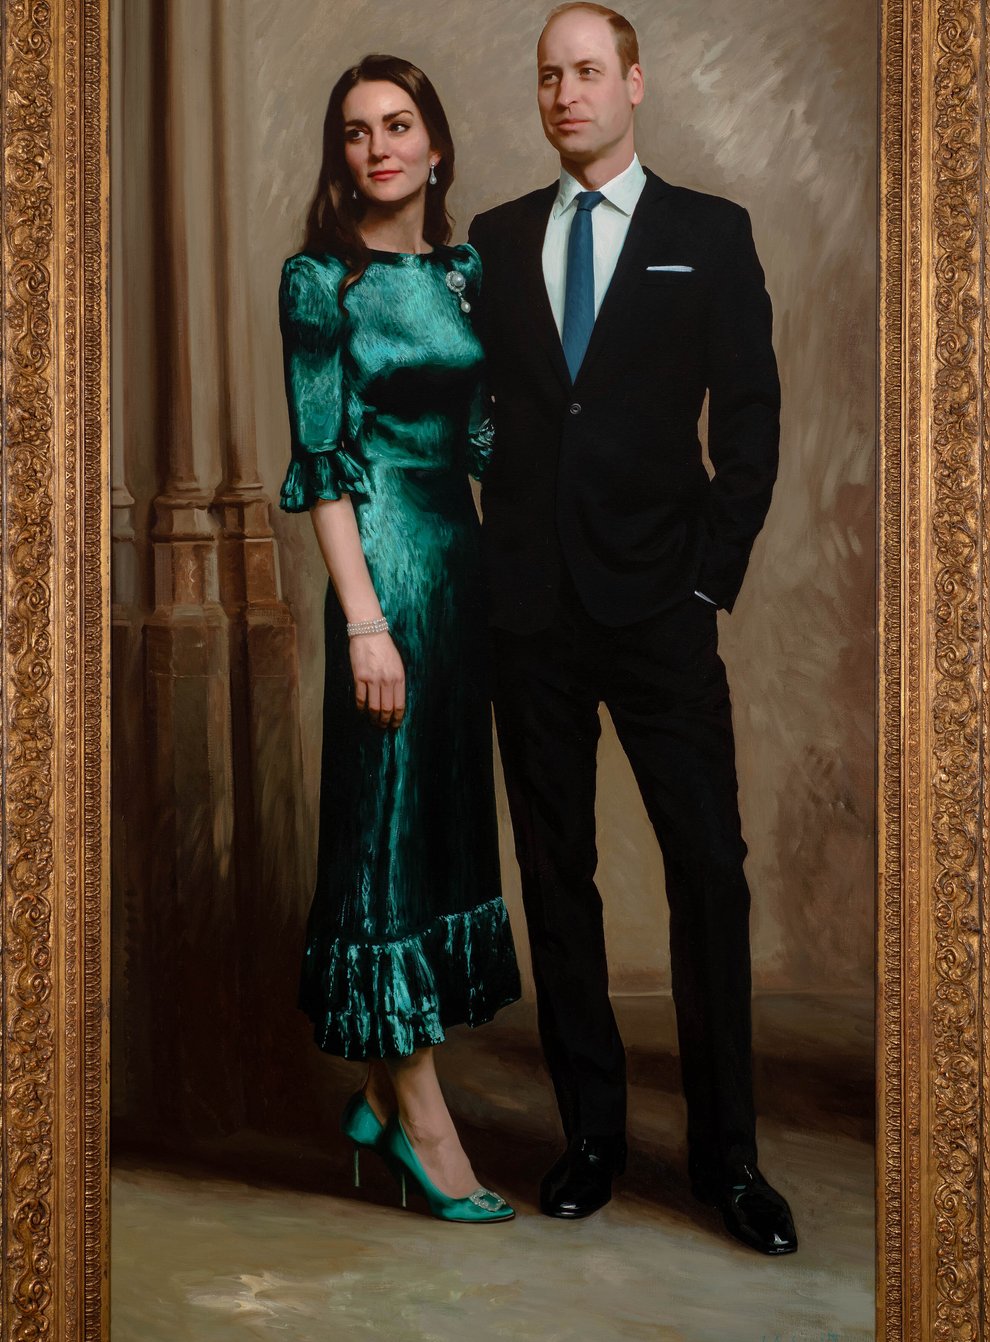 A new portrait of the Duke and Duchess of Cambridge painted by Jamie Coreth (Jamie Coreth/Fine Art Commissions/Kensington Palace/PA)